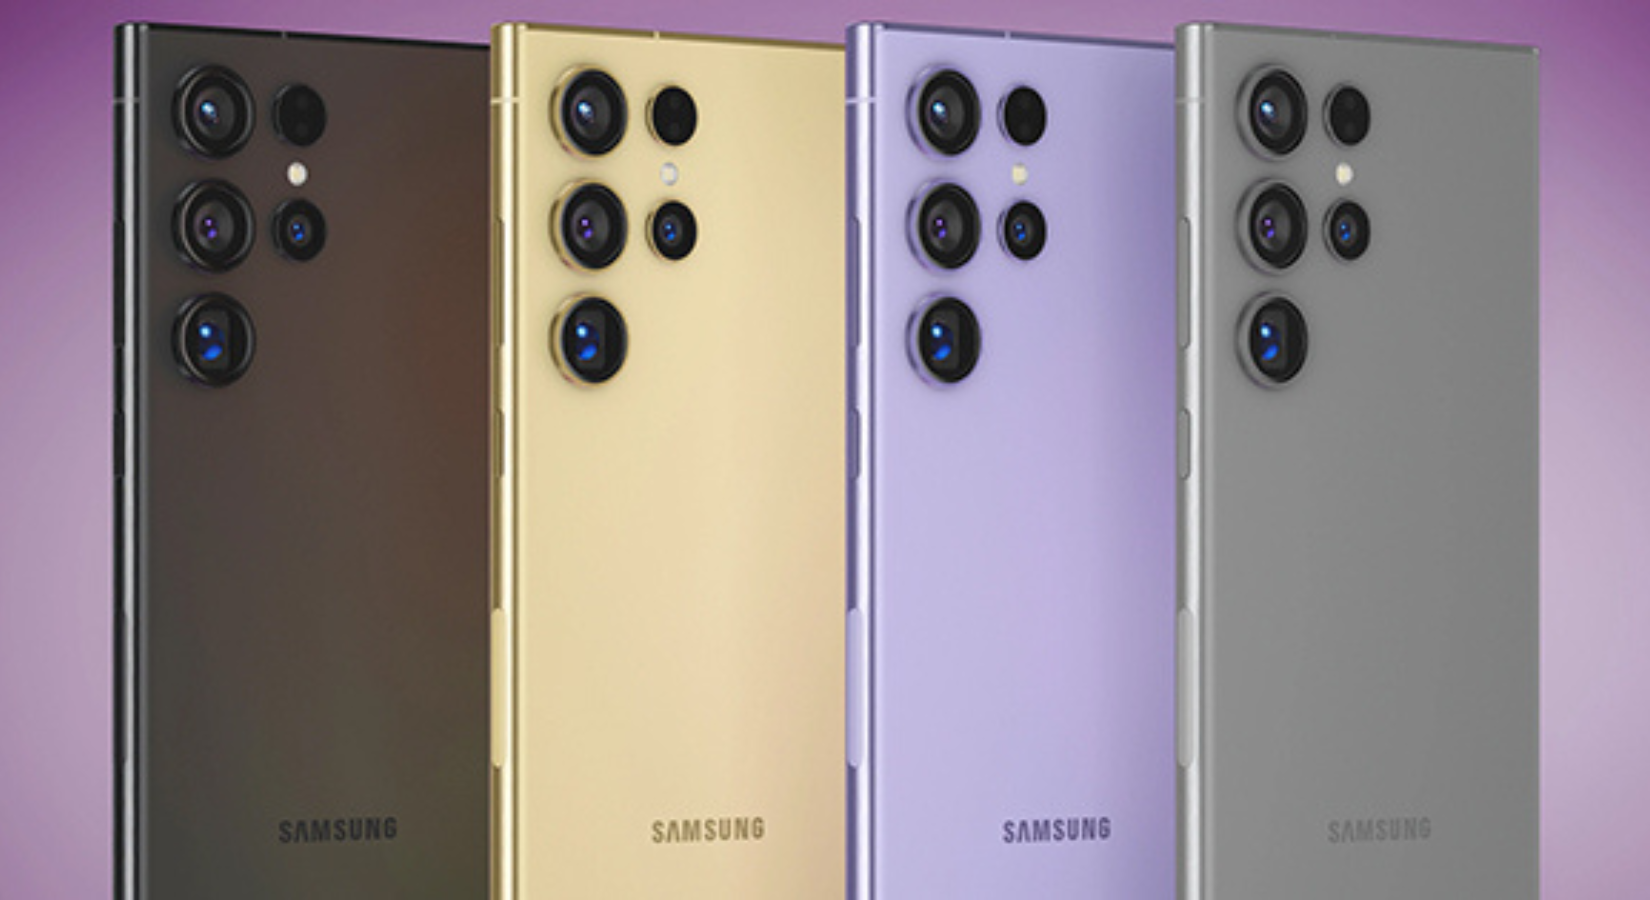 Is the Galaxy S24 Ultra Getting an Even Better Camera?